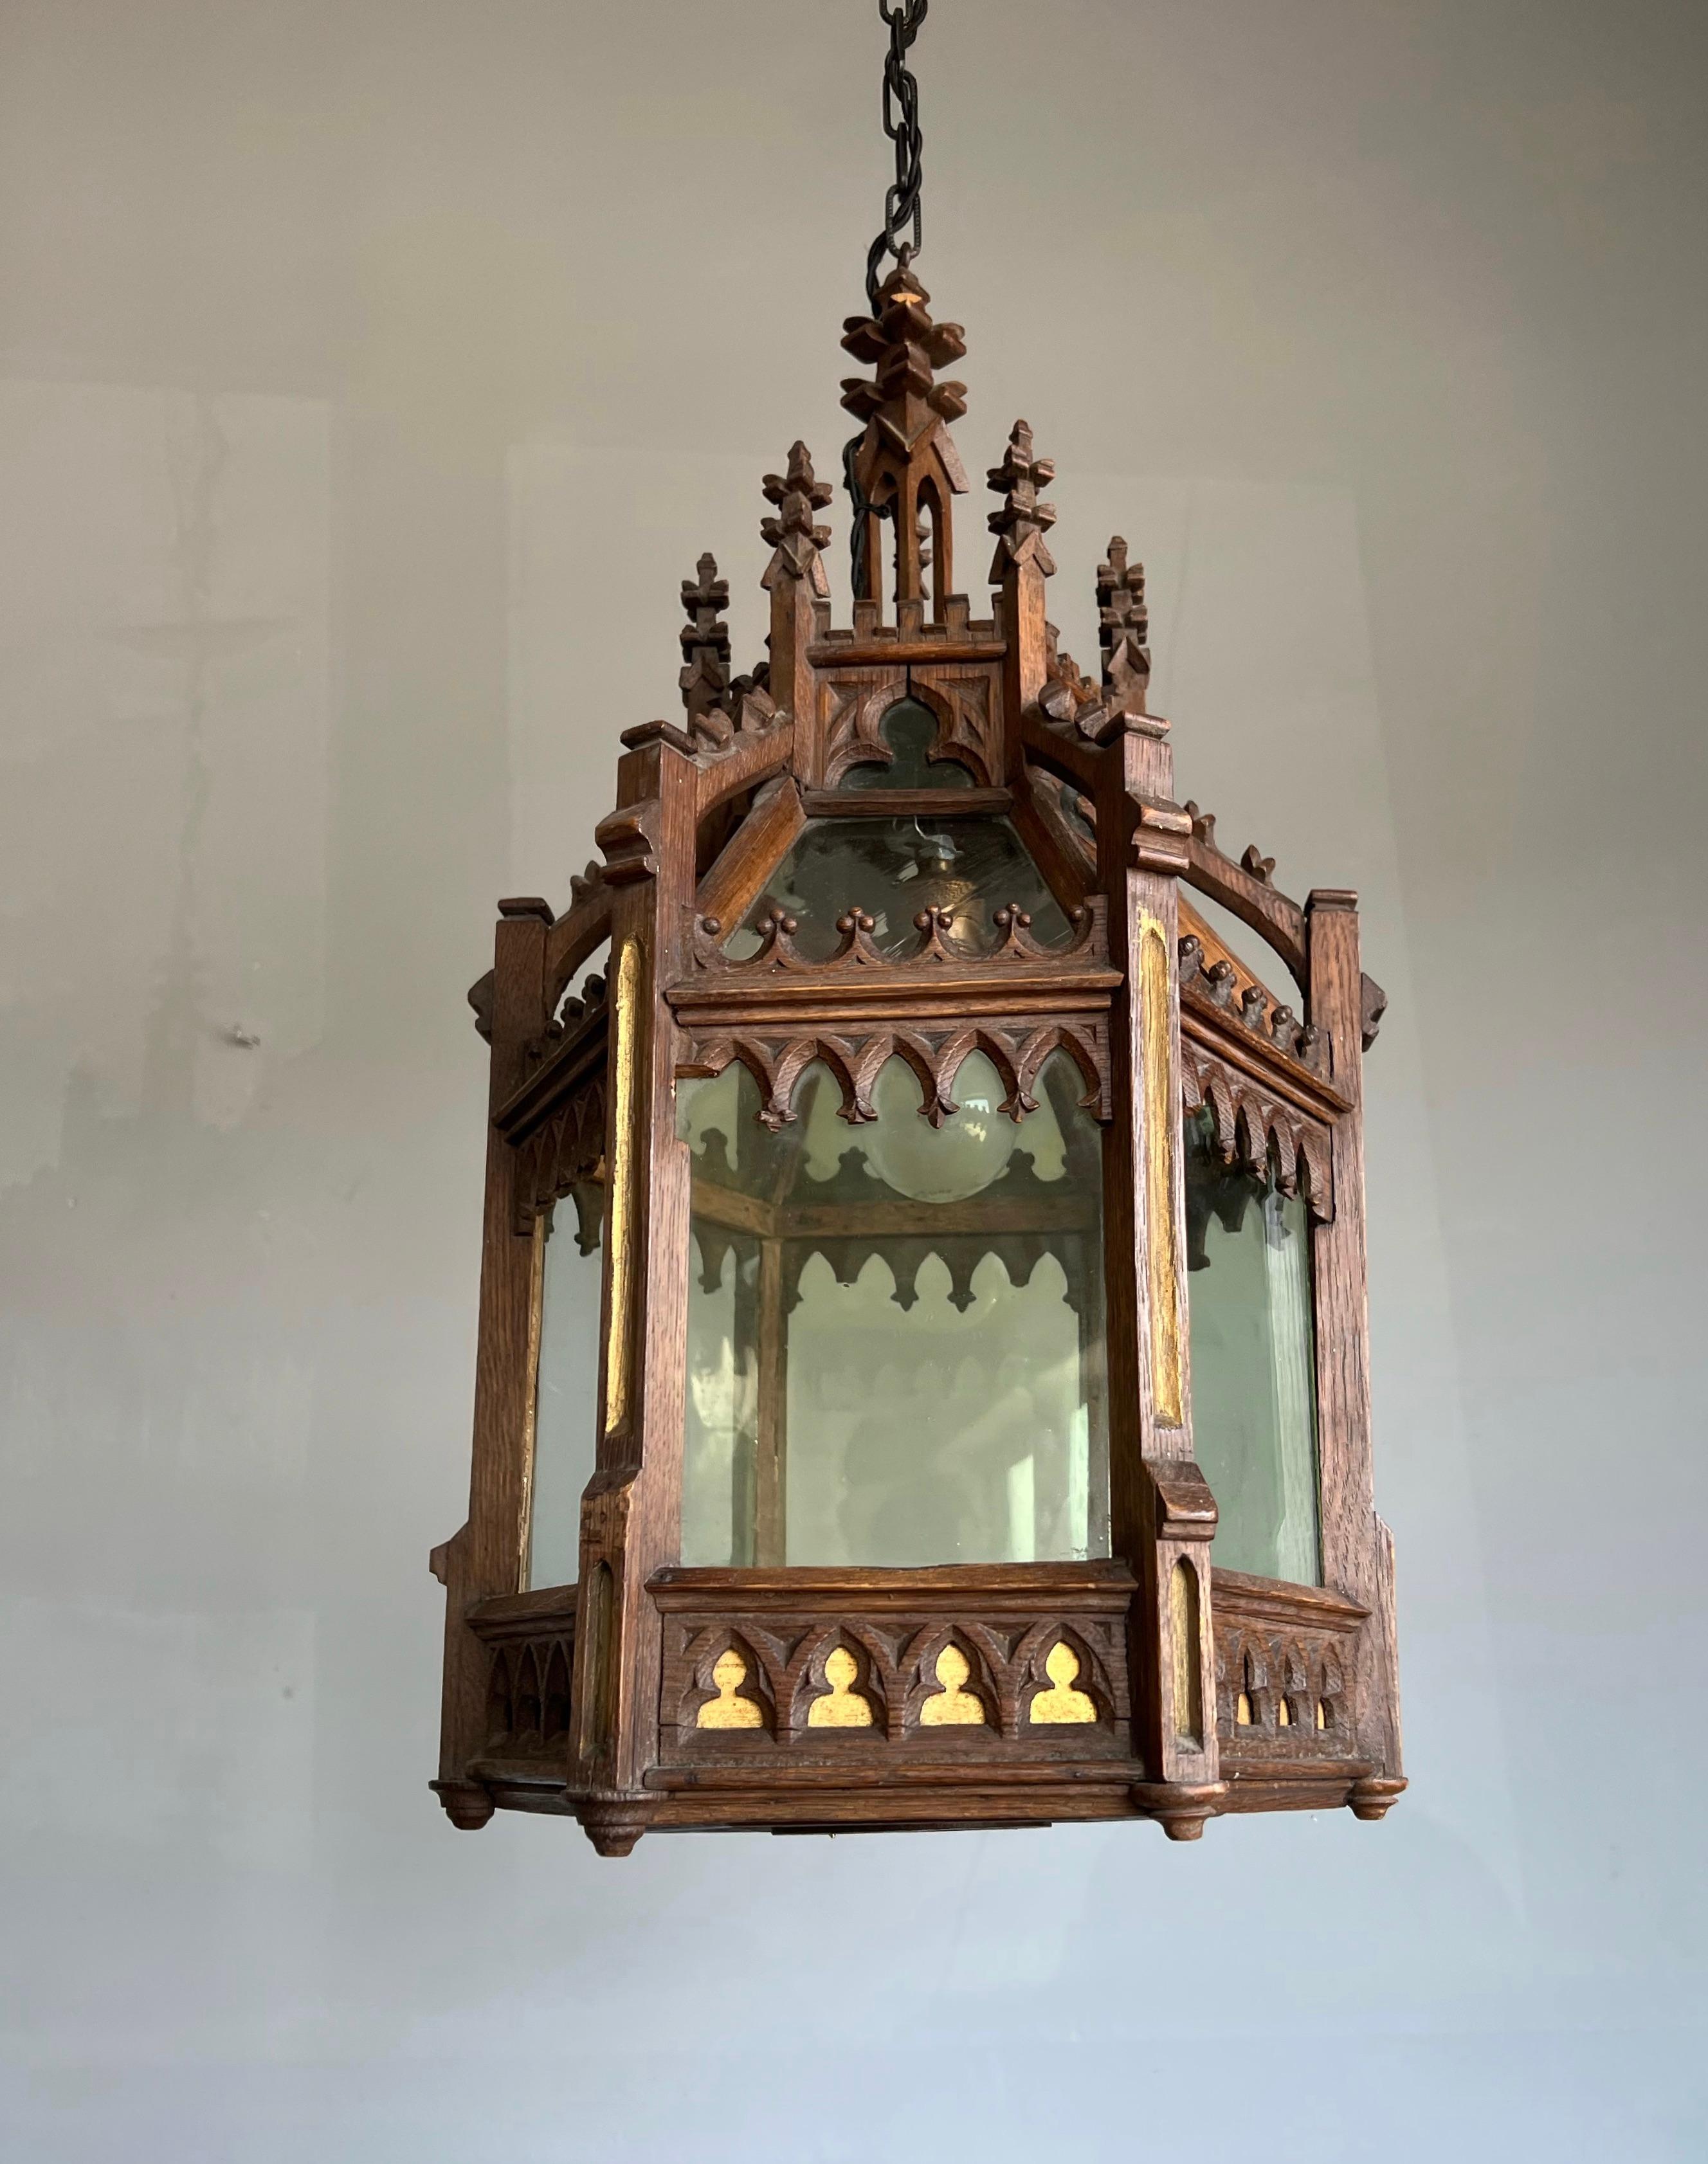 Truly impressive and great workmanship, hexagonal Gothic light fixture.

If you are a collector of truly amazing Gothic antiques then this large and possibly unique pendant could be flying your way soon. With antique light fixtures as one of our